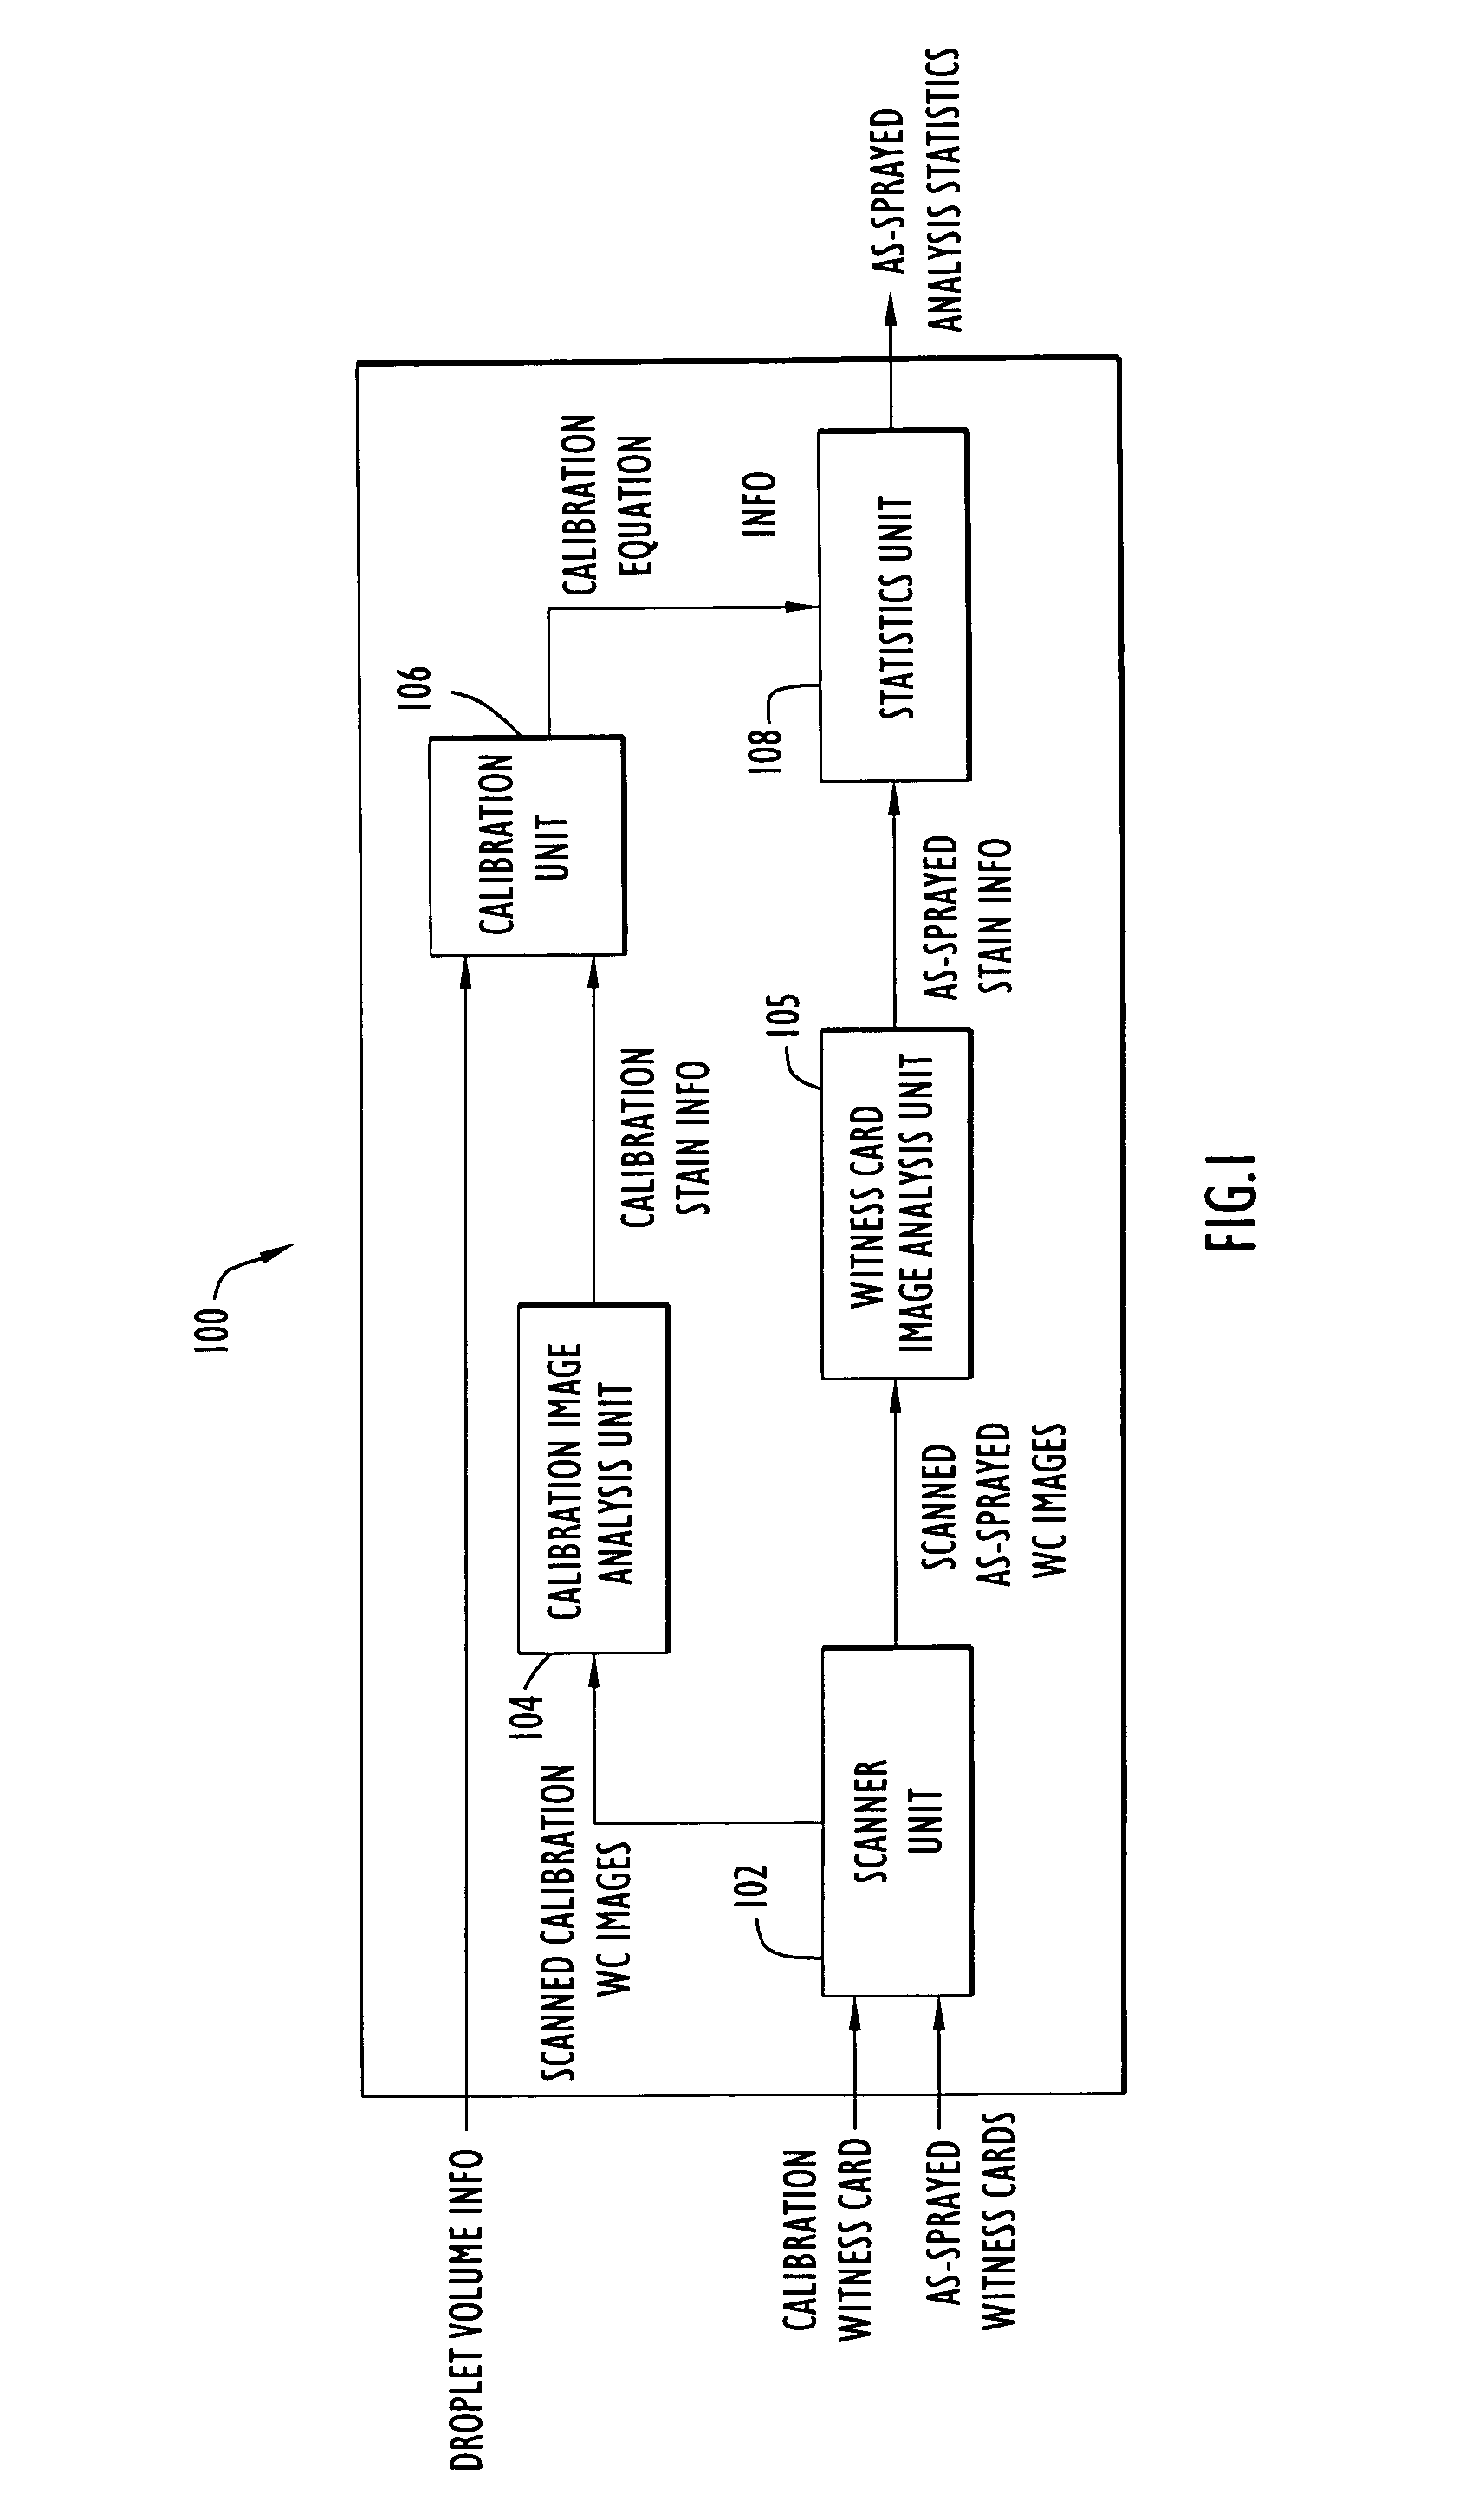 Method and apparatus for witness card statistical analysis using image processing techniques